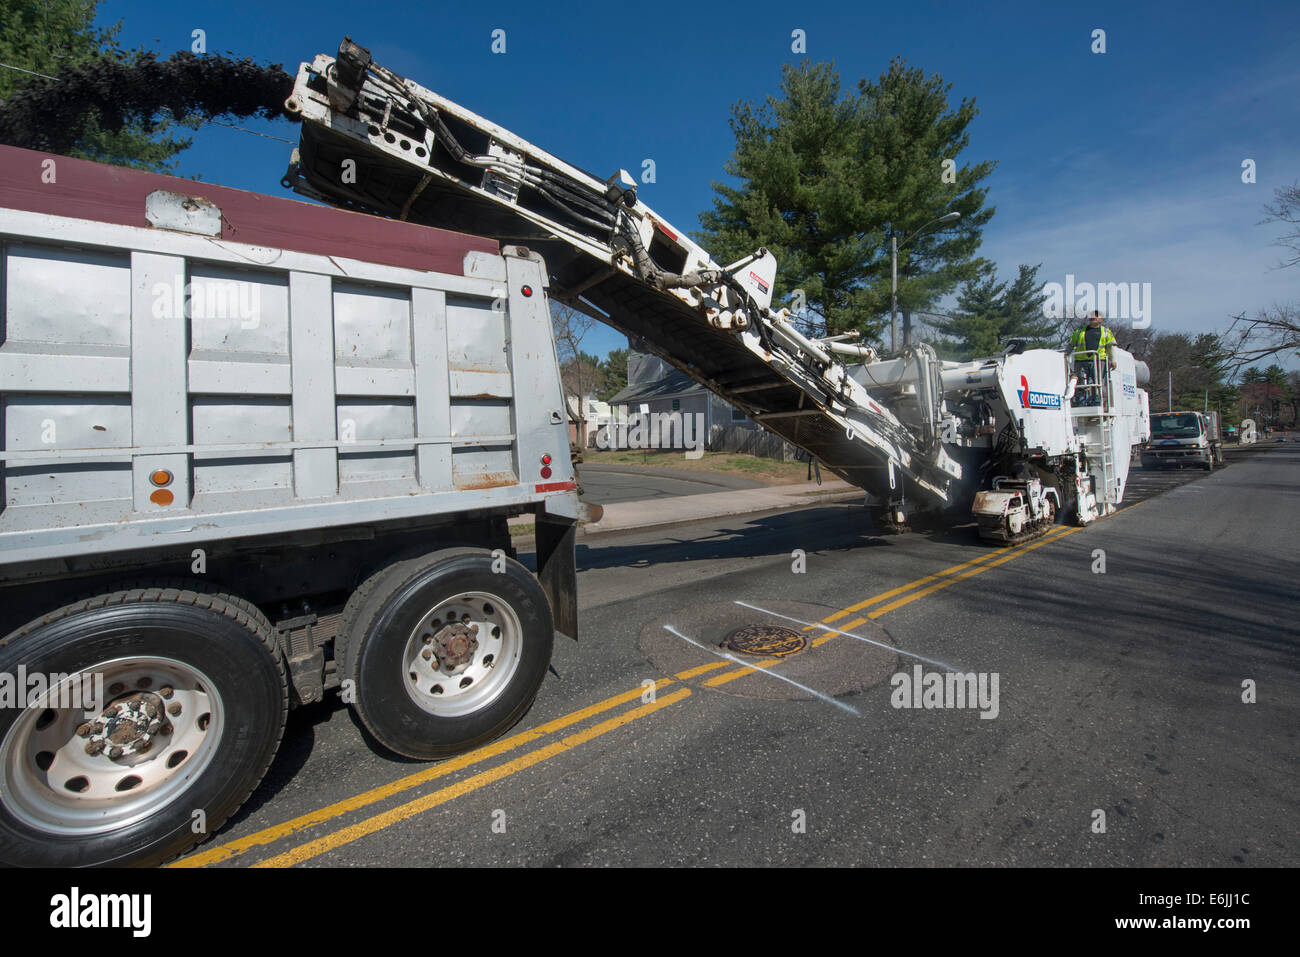 Pavement milling, cold planing, asphalt milling, or profiling machine prepared road in Hartford for repaving Stock Photo